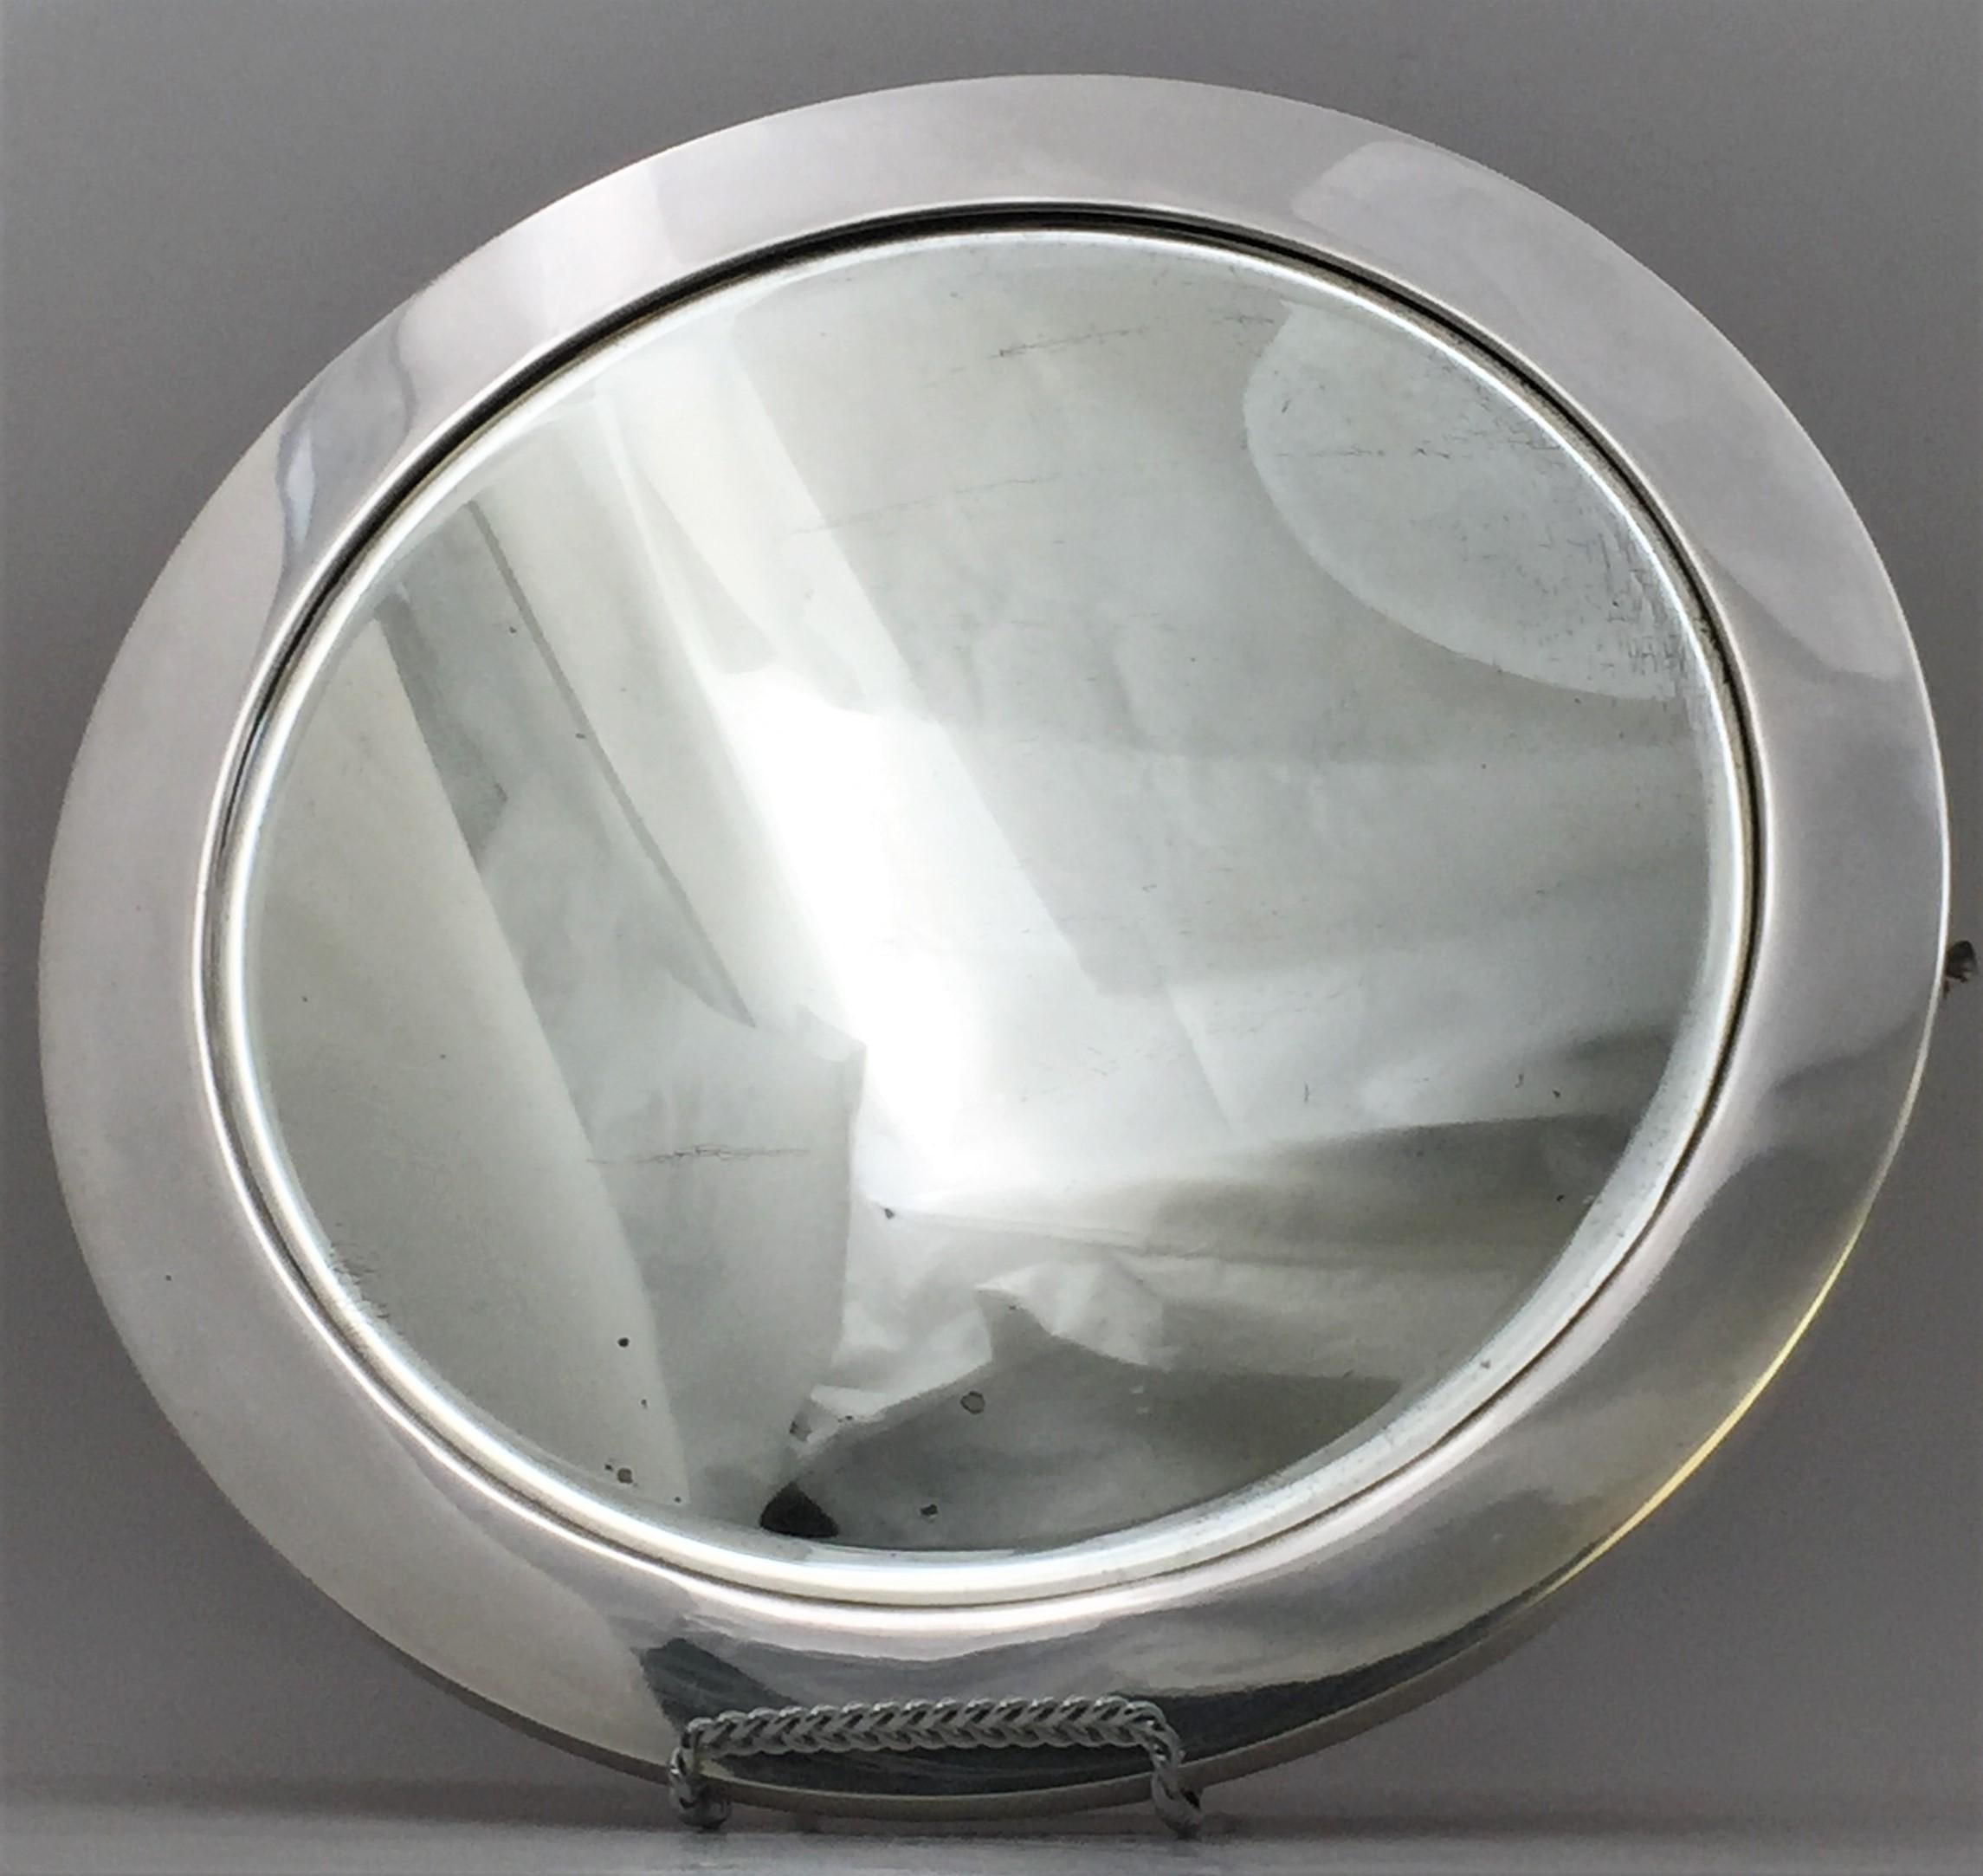 Tiffany & Co. sterling silver table mirror in pattern number 17394 from 1909, in Art Deco style with an elegant geometric design, which may also be used as a vanity tray or display platter. It measures 14 3/4 in. in diameter by 7/8'' in height, has